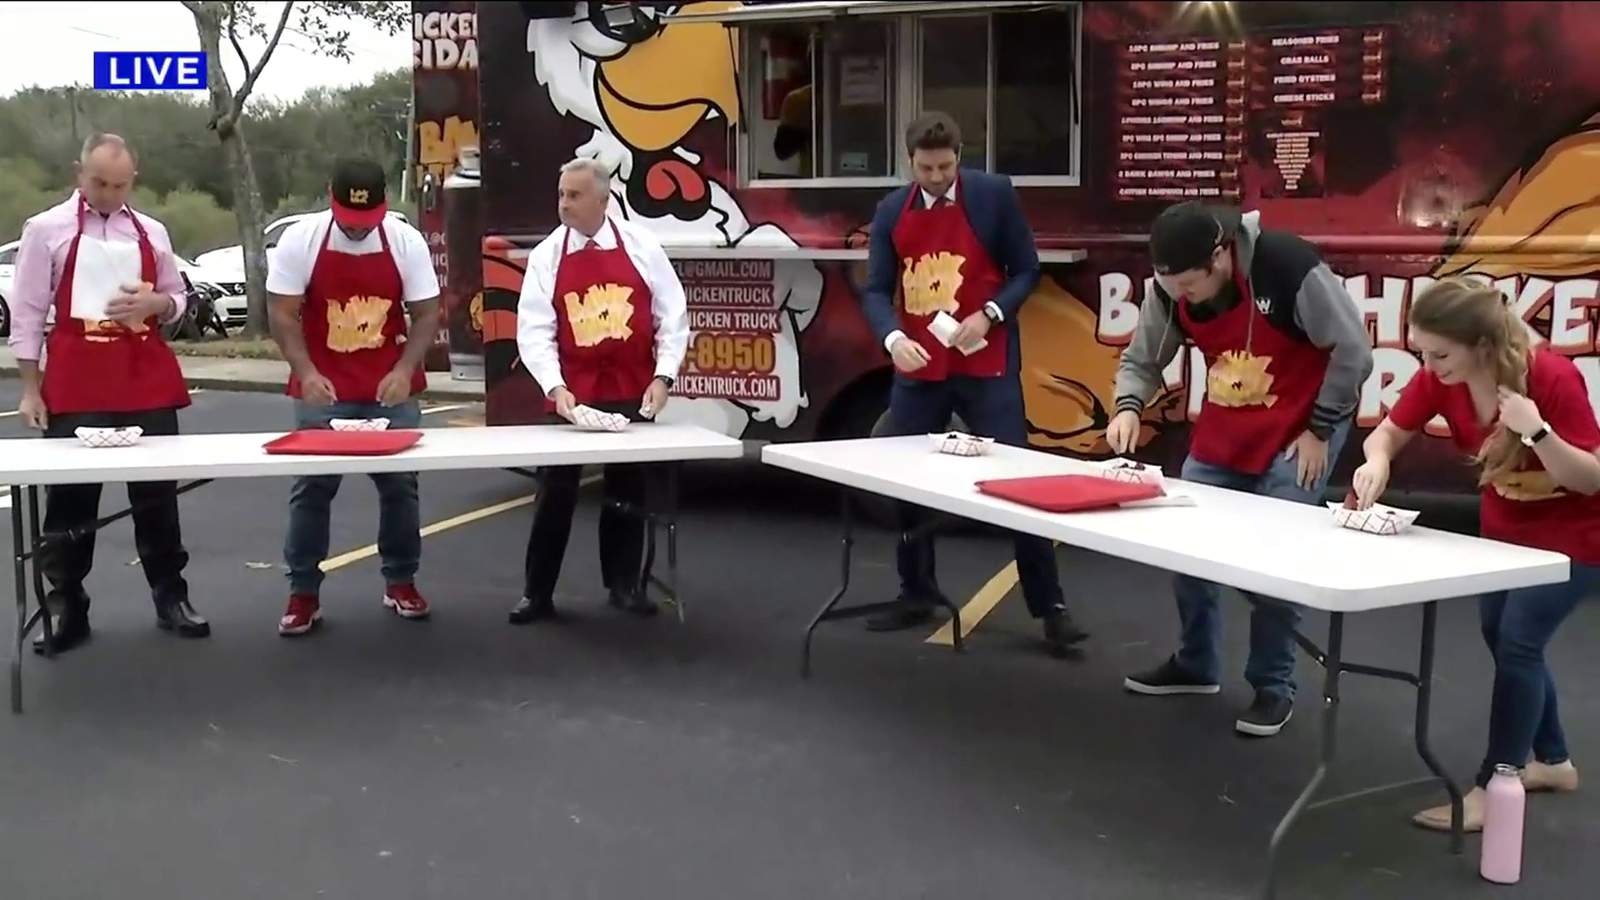 TMS crew and Bawk Bawk Chicken Truck hold spicy wing eating competition